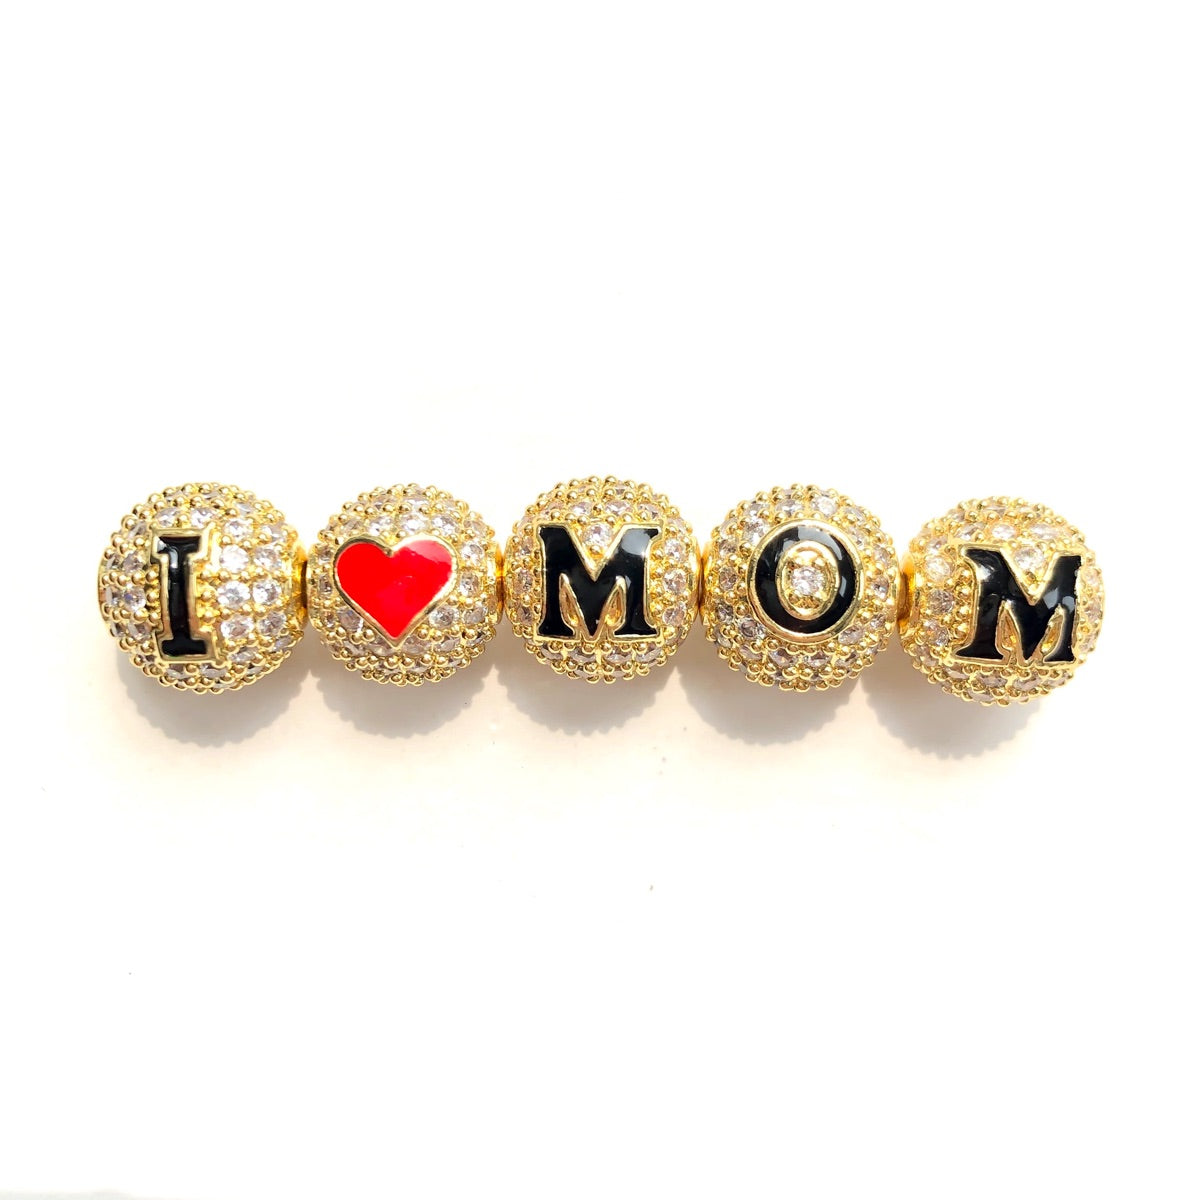 10pcs/lot 10mm CZ Paved I LOVE MOM Letter Ball Spacers Beads for Mother's Day Gold-2 Sets CZ Paved Spacers 10mm Beads Ball Beads Mother's Day Mother's Day Beads New Spacers Arrivals Charms Beads Beyond